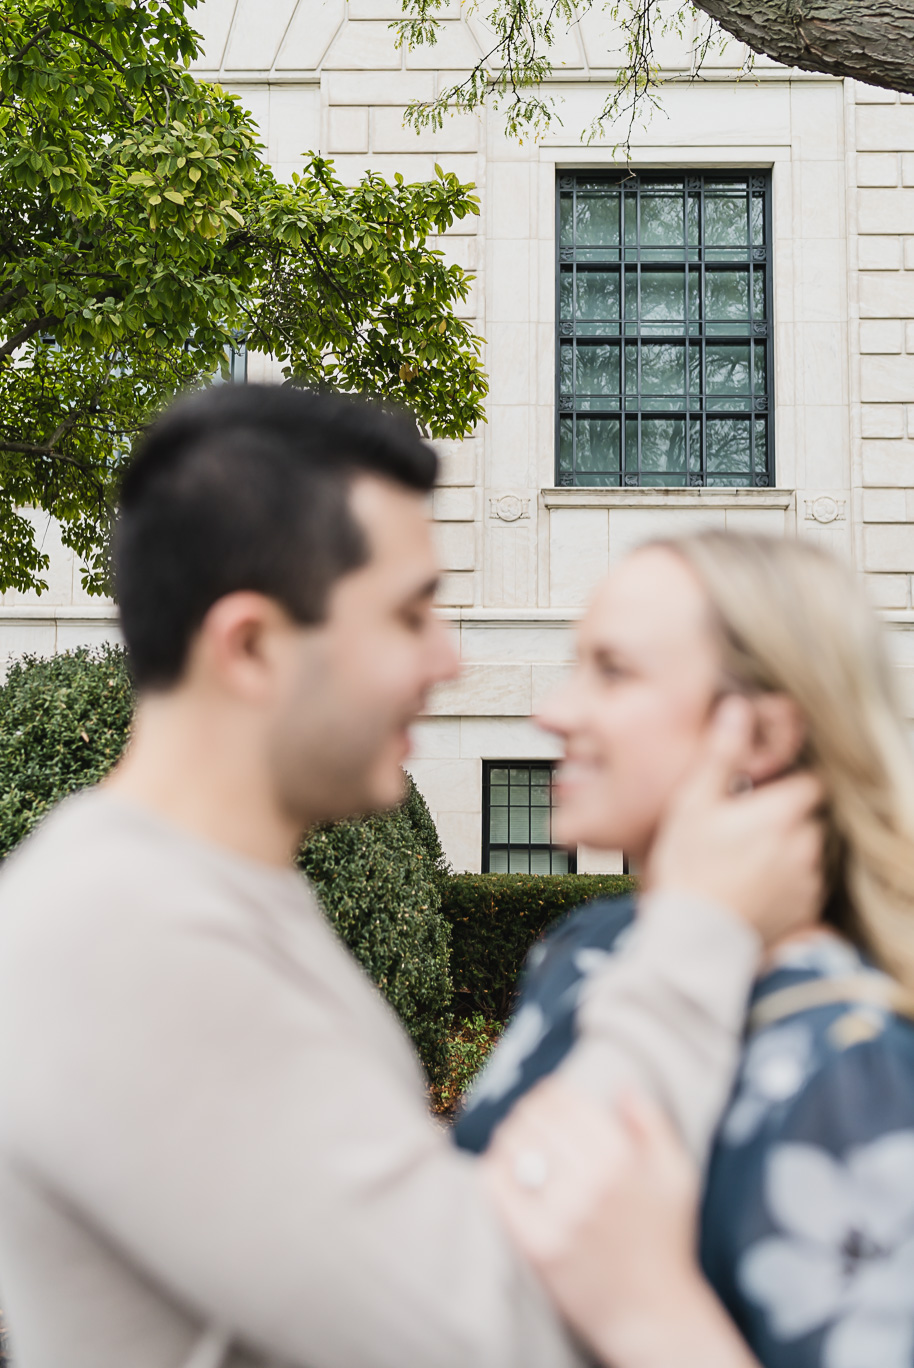 A fall engagement session in Detroit at the Detroit Public Library and Detroit Institute of Arts by Kari Dawson.